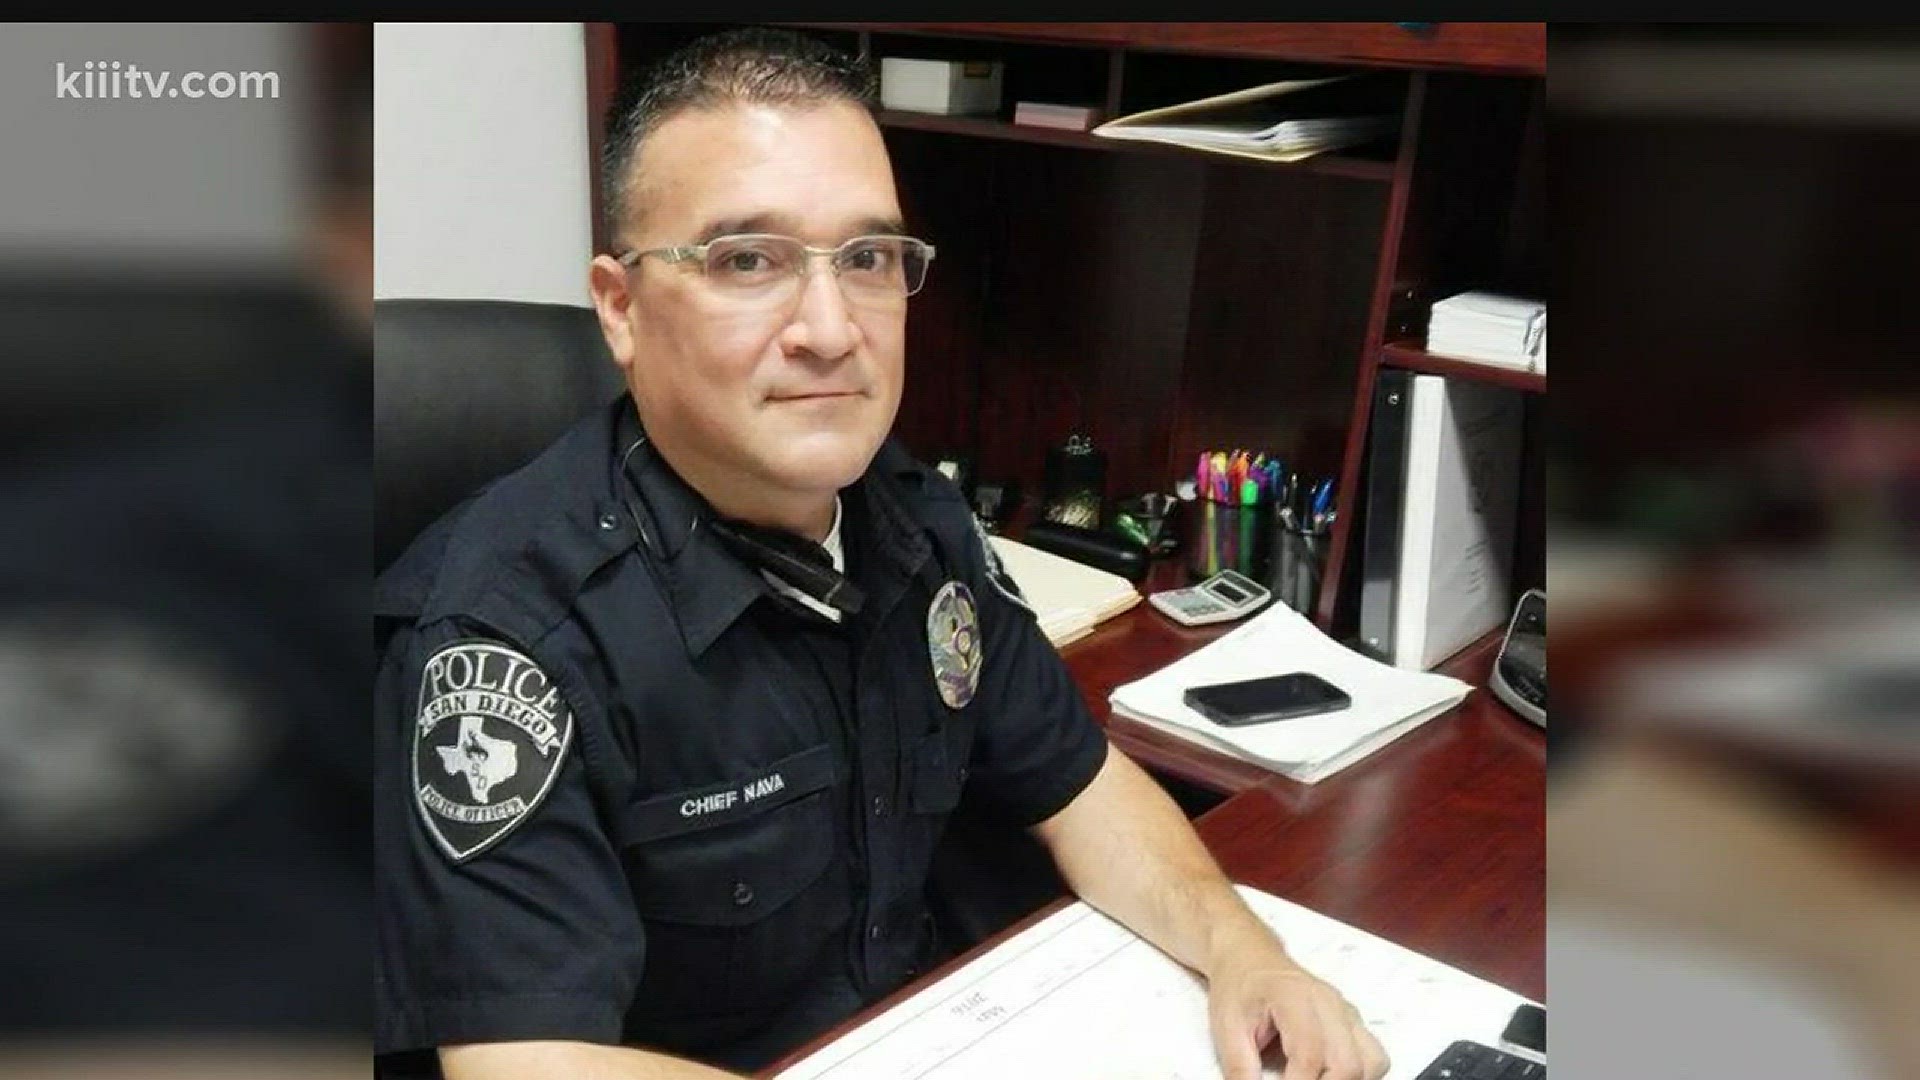 San Diego Police Chief Richard Nava was fired by City Council during their Wednesday meeting, according to the Alice-Echo News Journal.